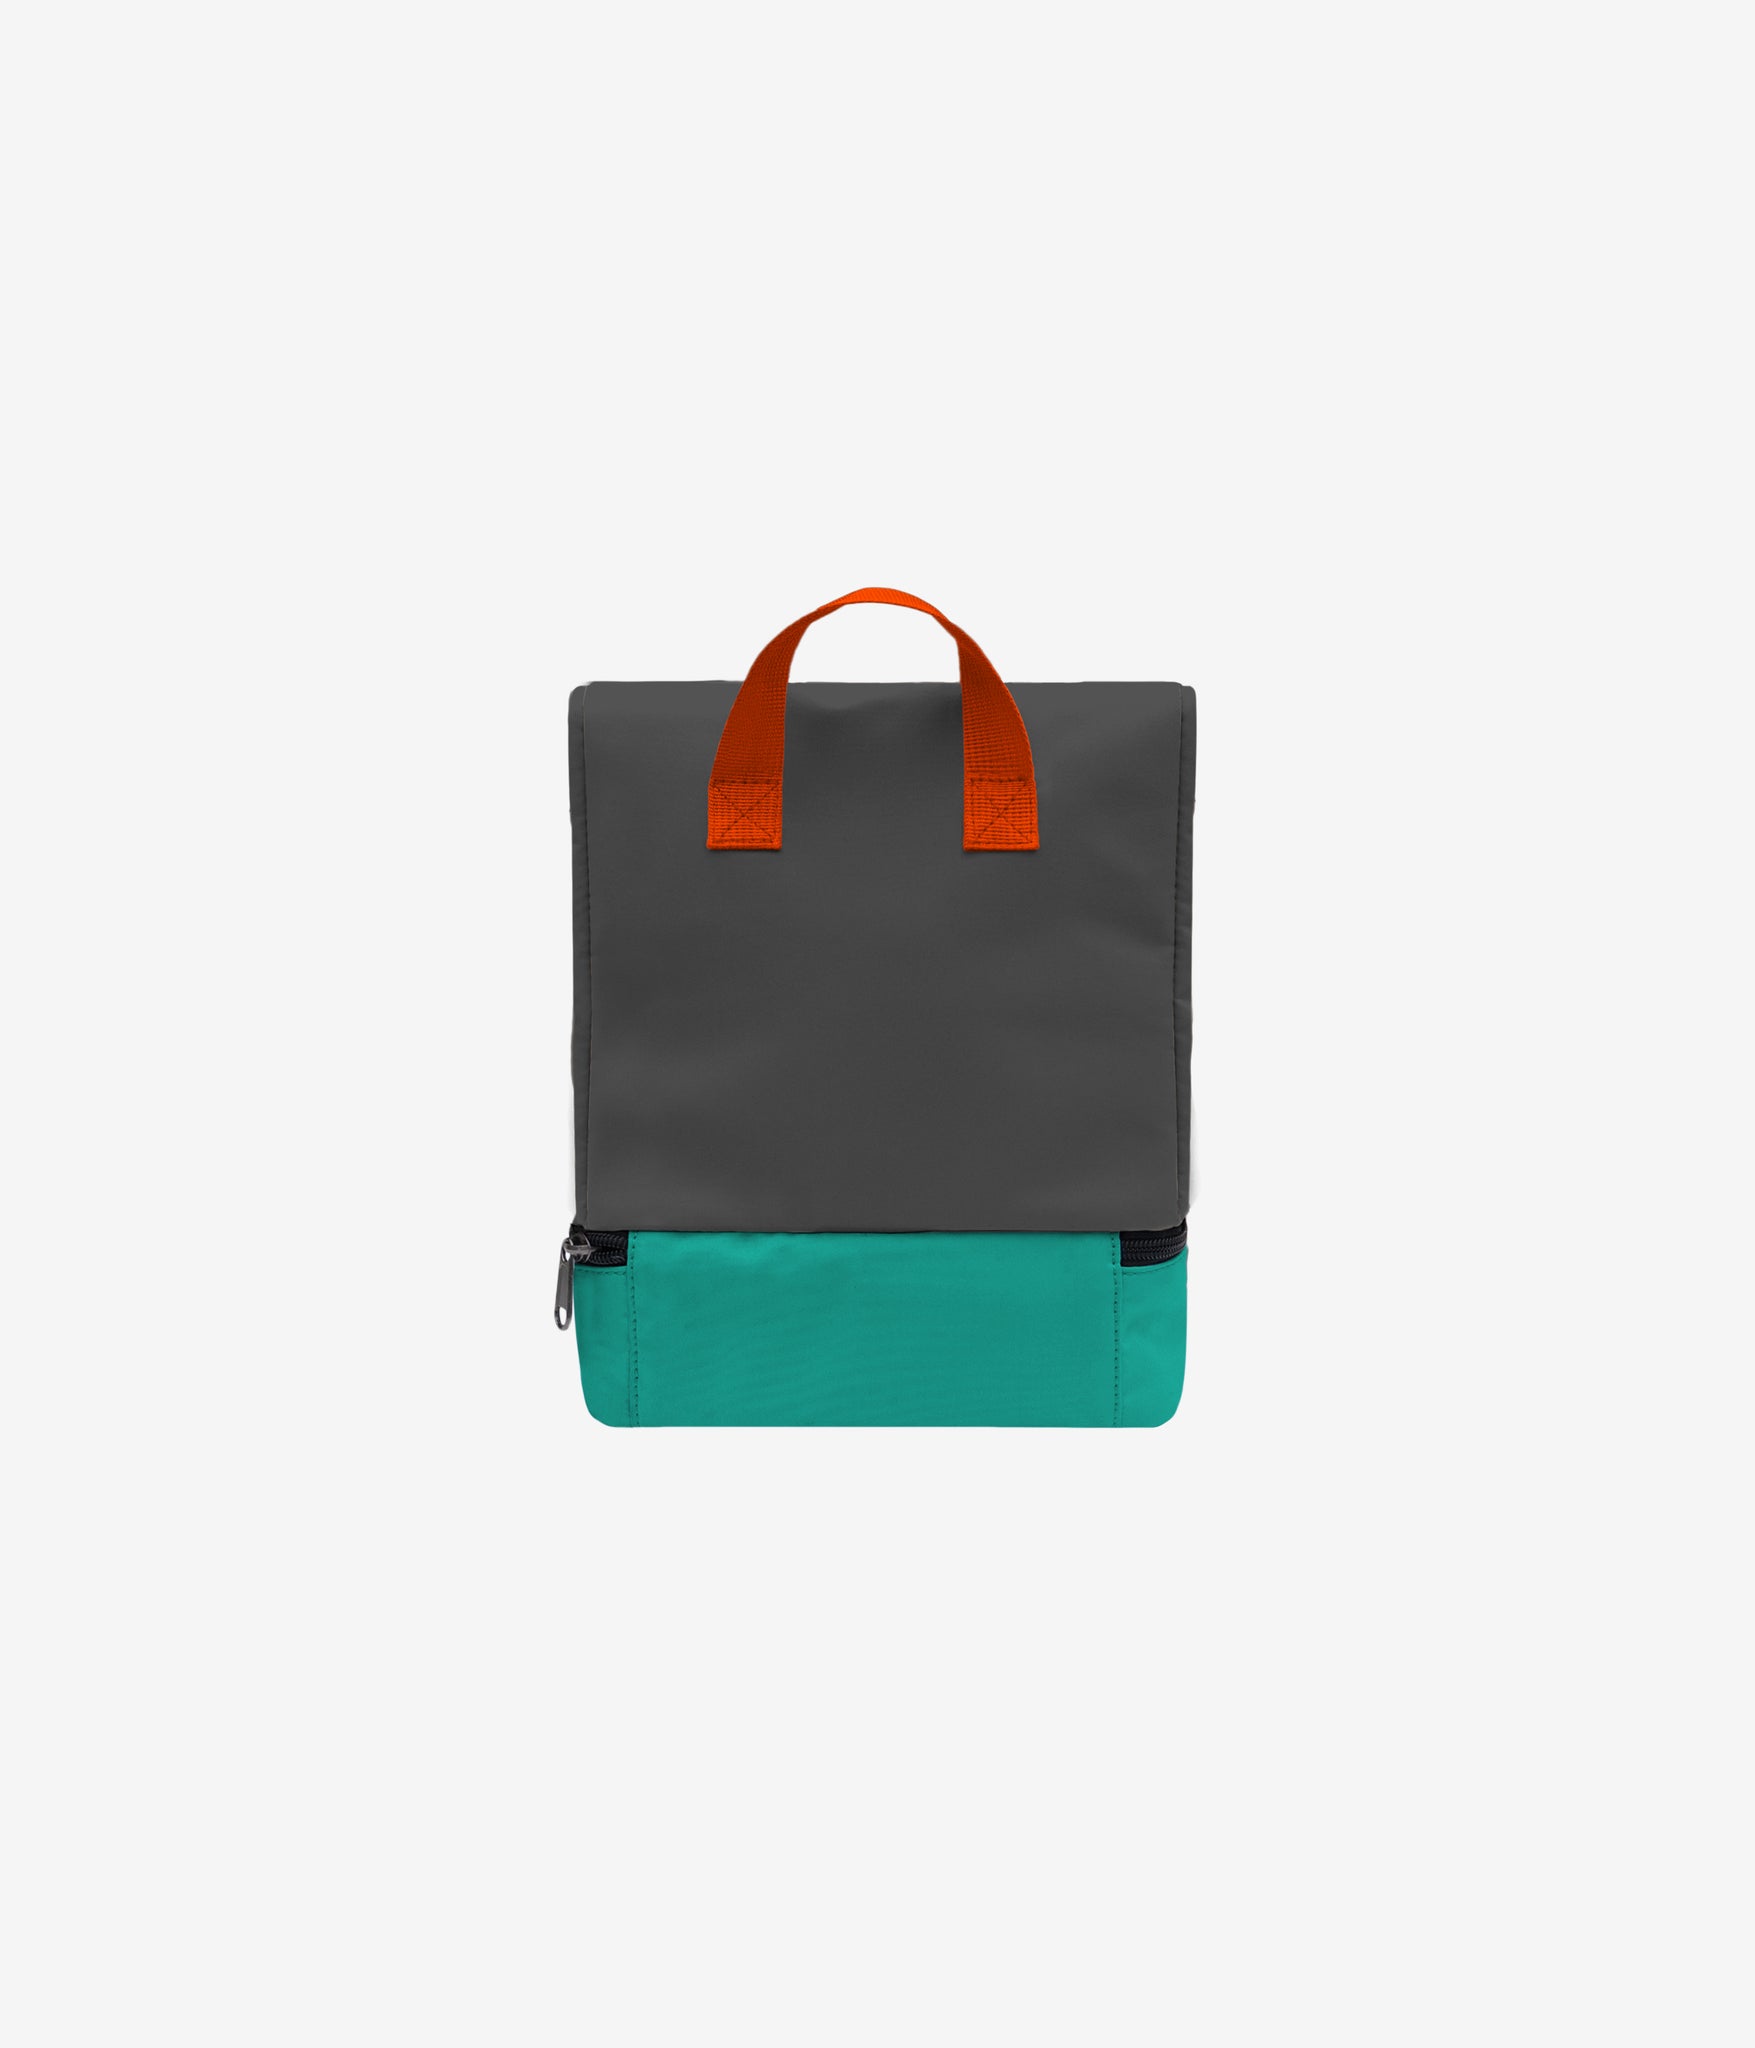 Colorblock Lunch Box - Charcoal